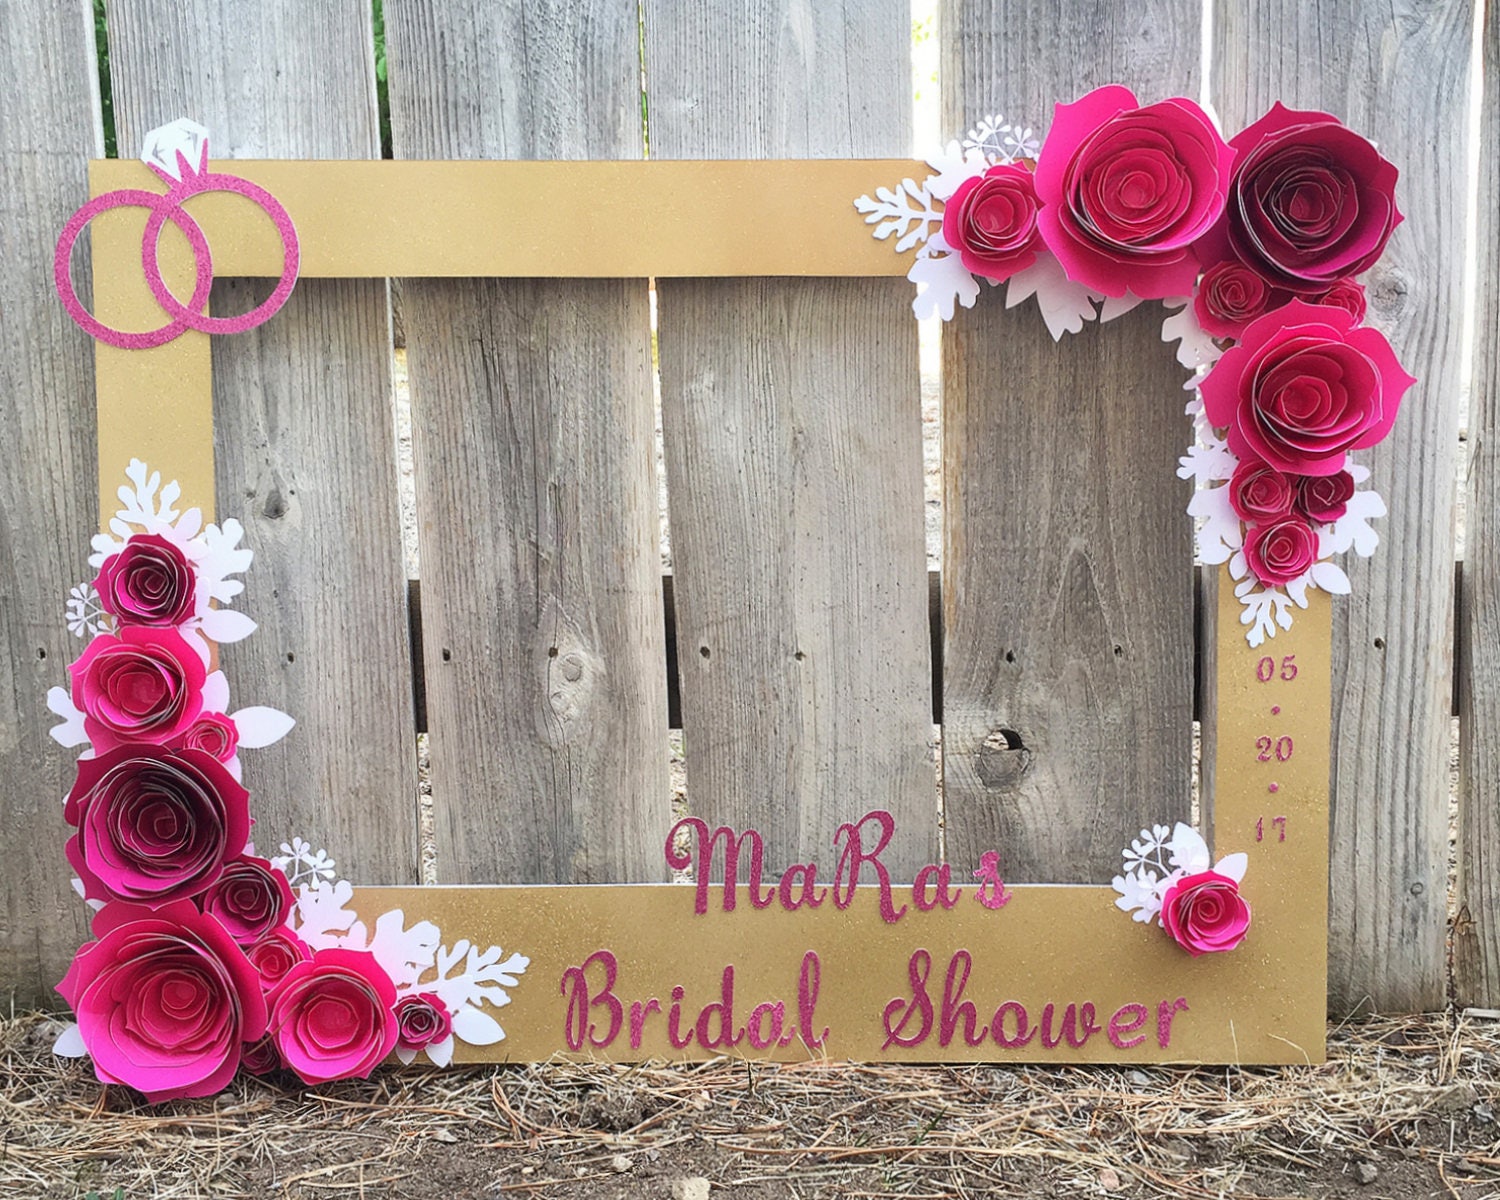 Gold Floral Frame Photo booth prop with 3D flowers perfect